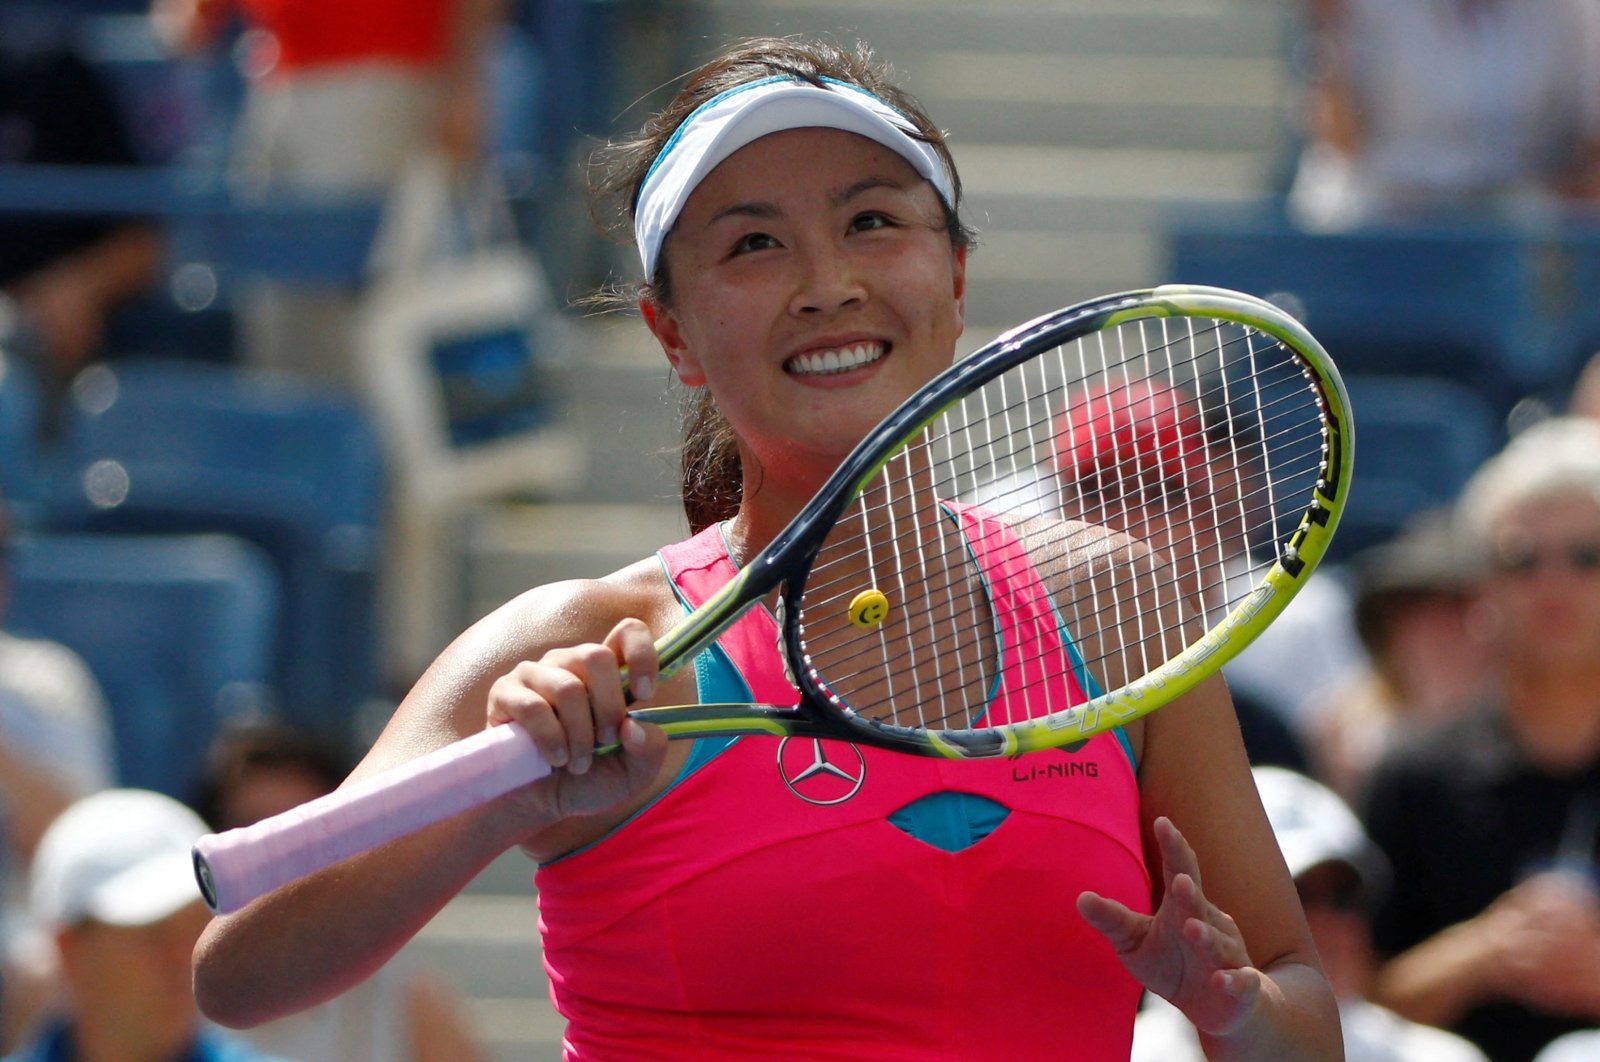 Peng Shuai of China reacts after her victory over Belinda Bencic of Switzerland in their quarterfinals match at the 2014 U.S. Open tennis tournament in New York, U.S., Sept. 2, 2014. (Reuters Photo)